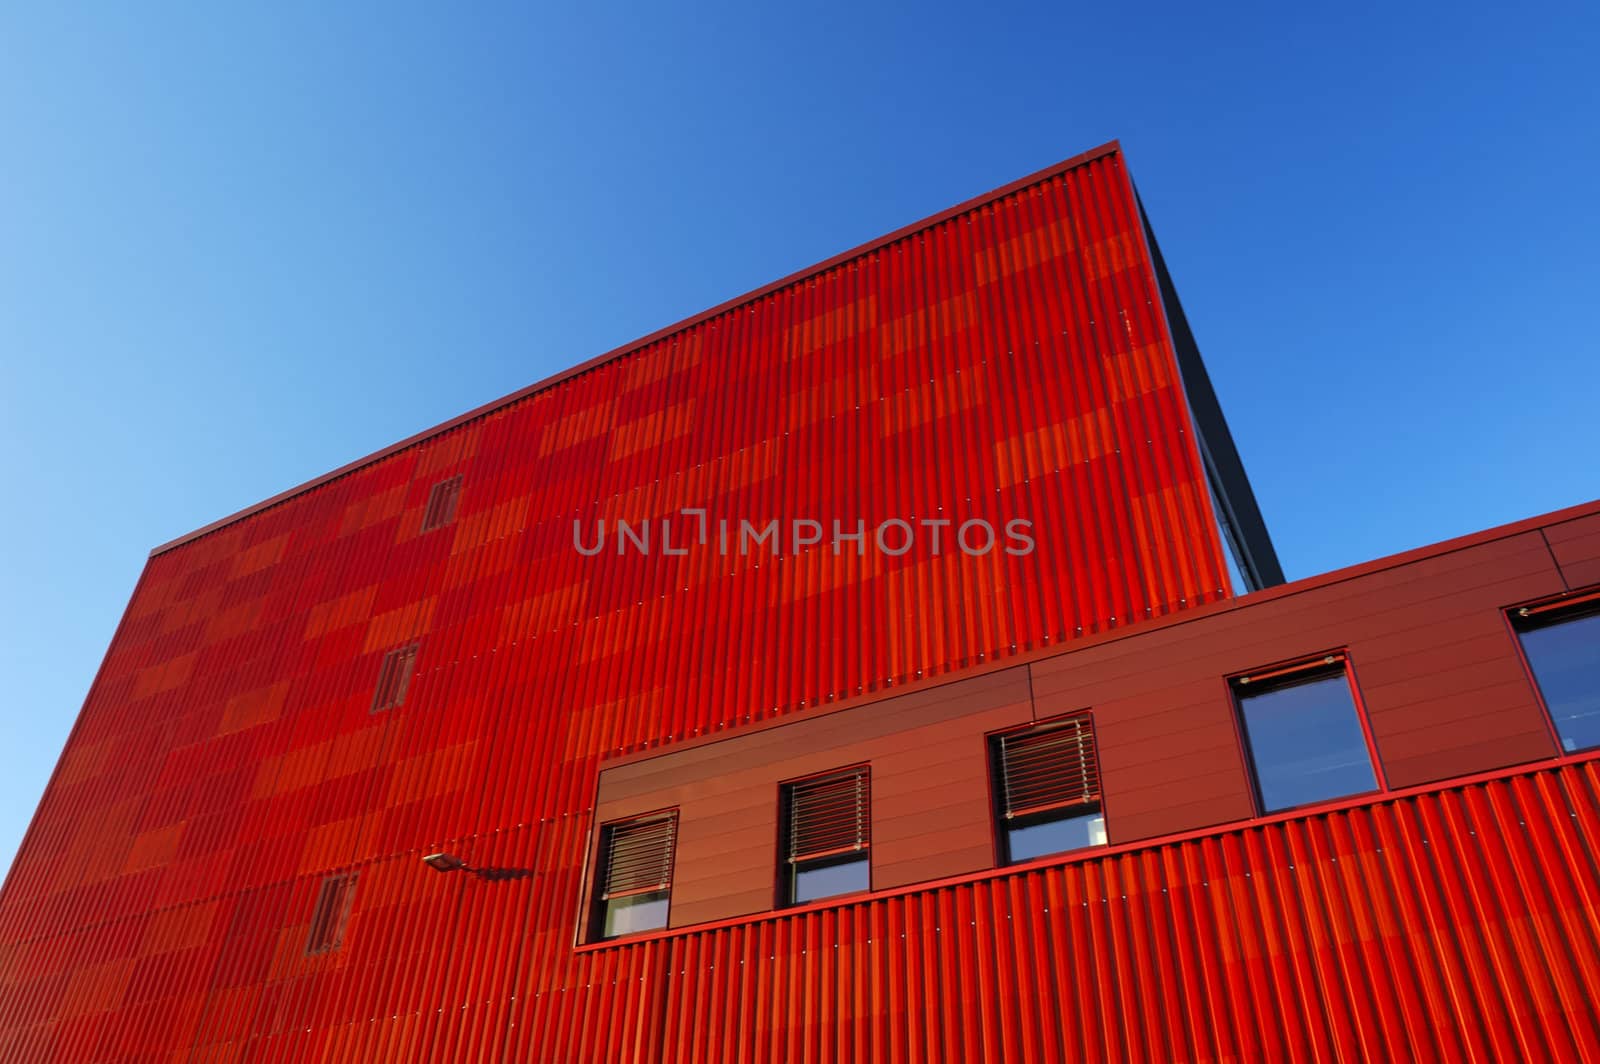 An orange factory building towers above the viewer, contrasting strongly with a clear blue sky